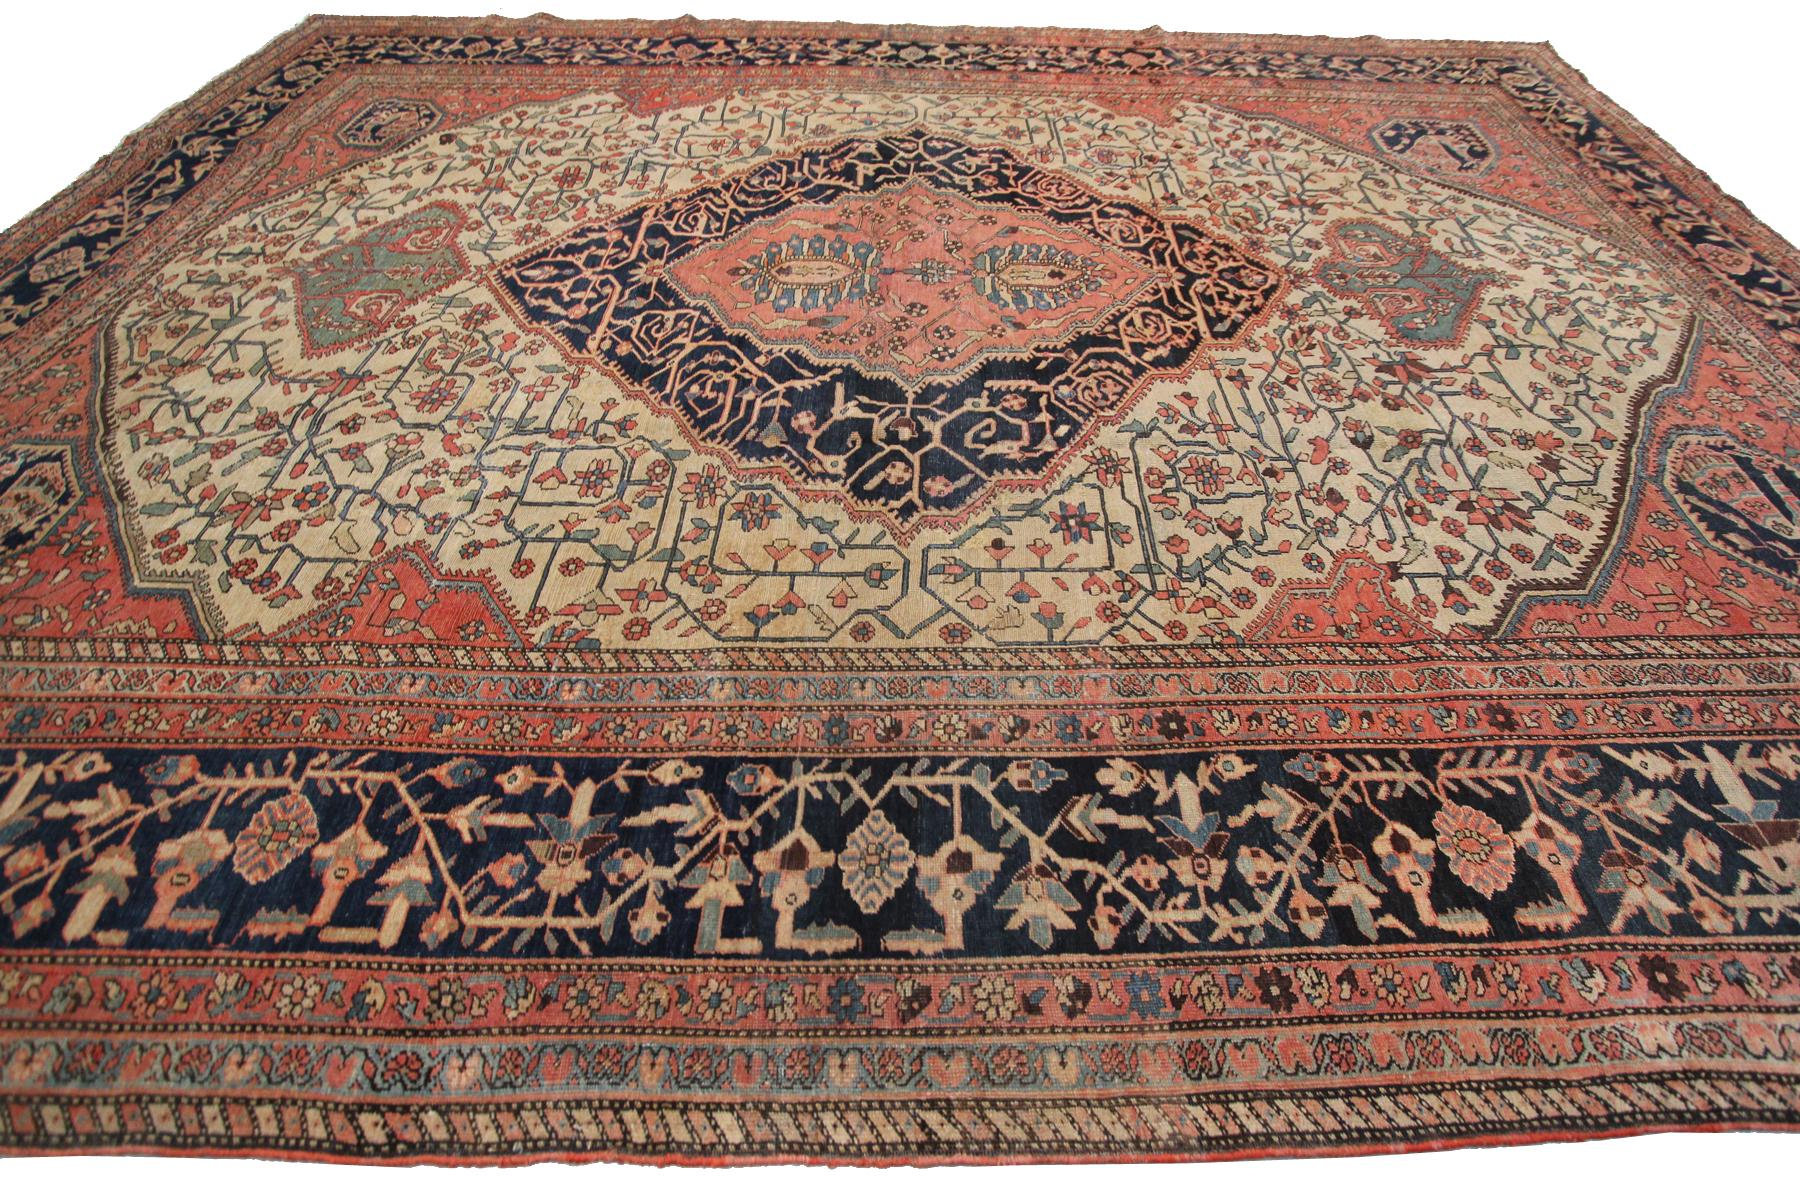 Hand-Knotted 1870 Antique Persian Farahan Rug Antique Farahan Rug Peacock Design For Sale